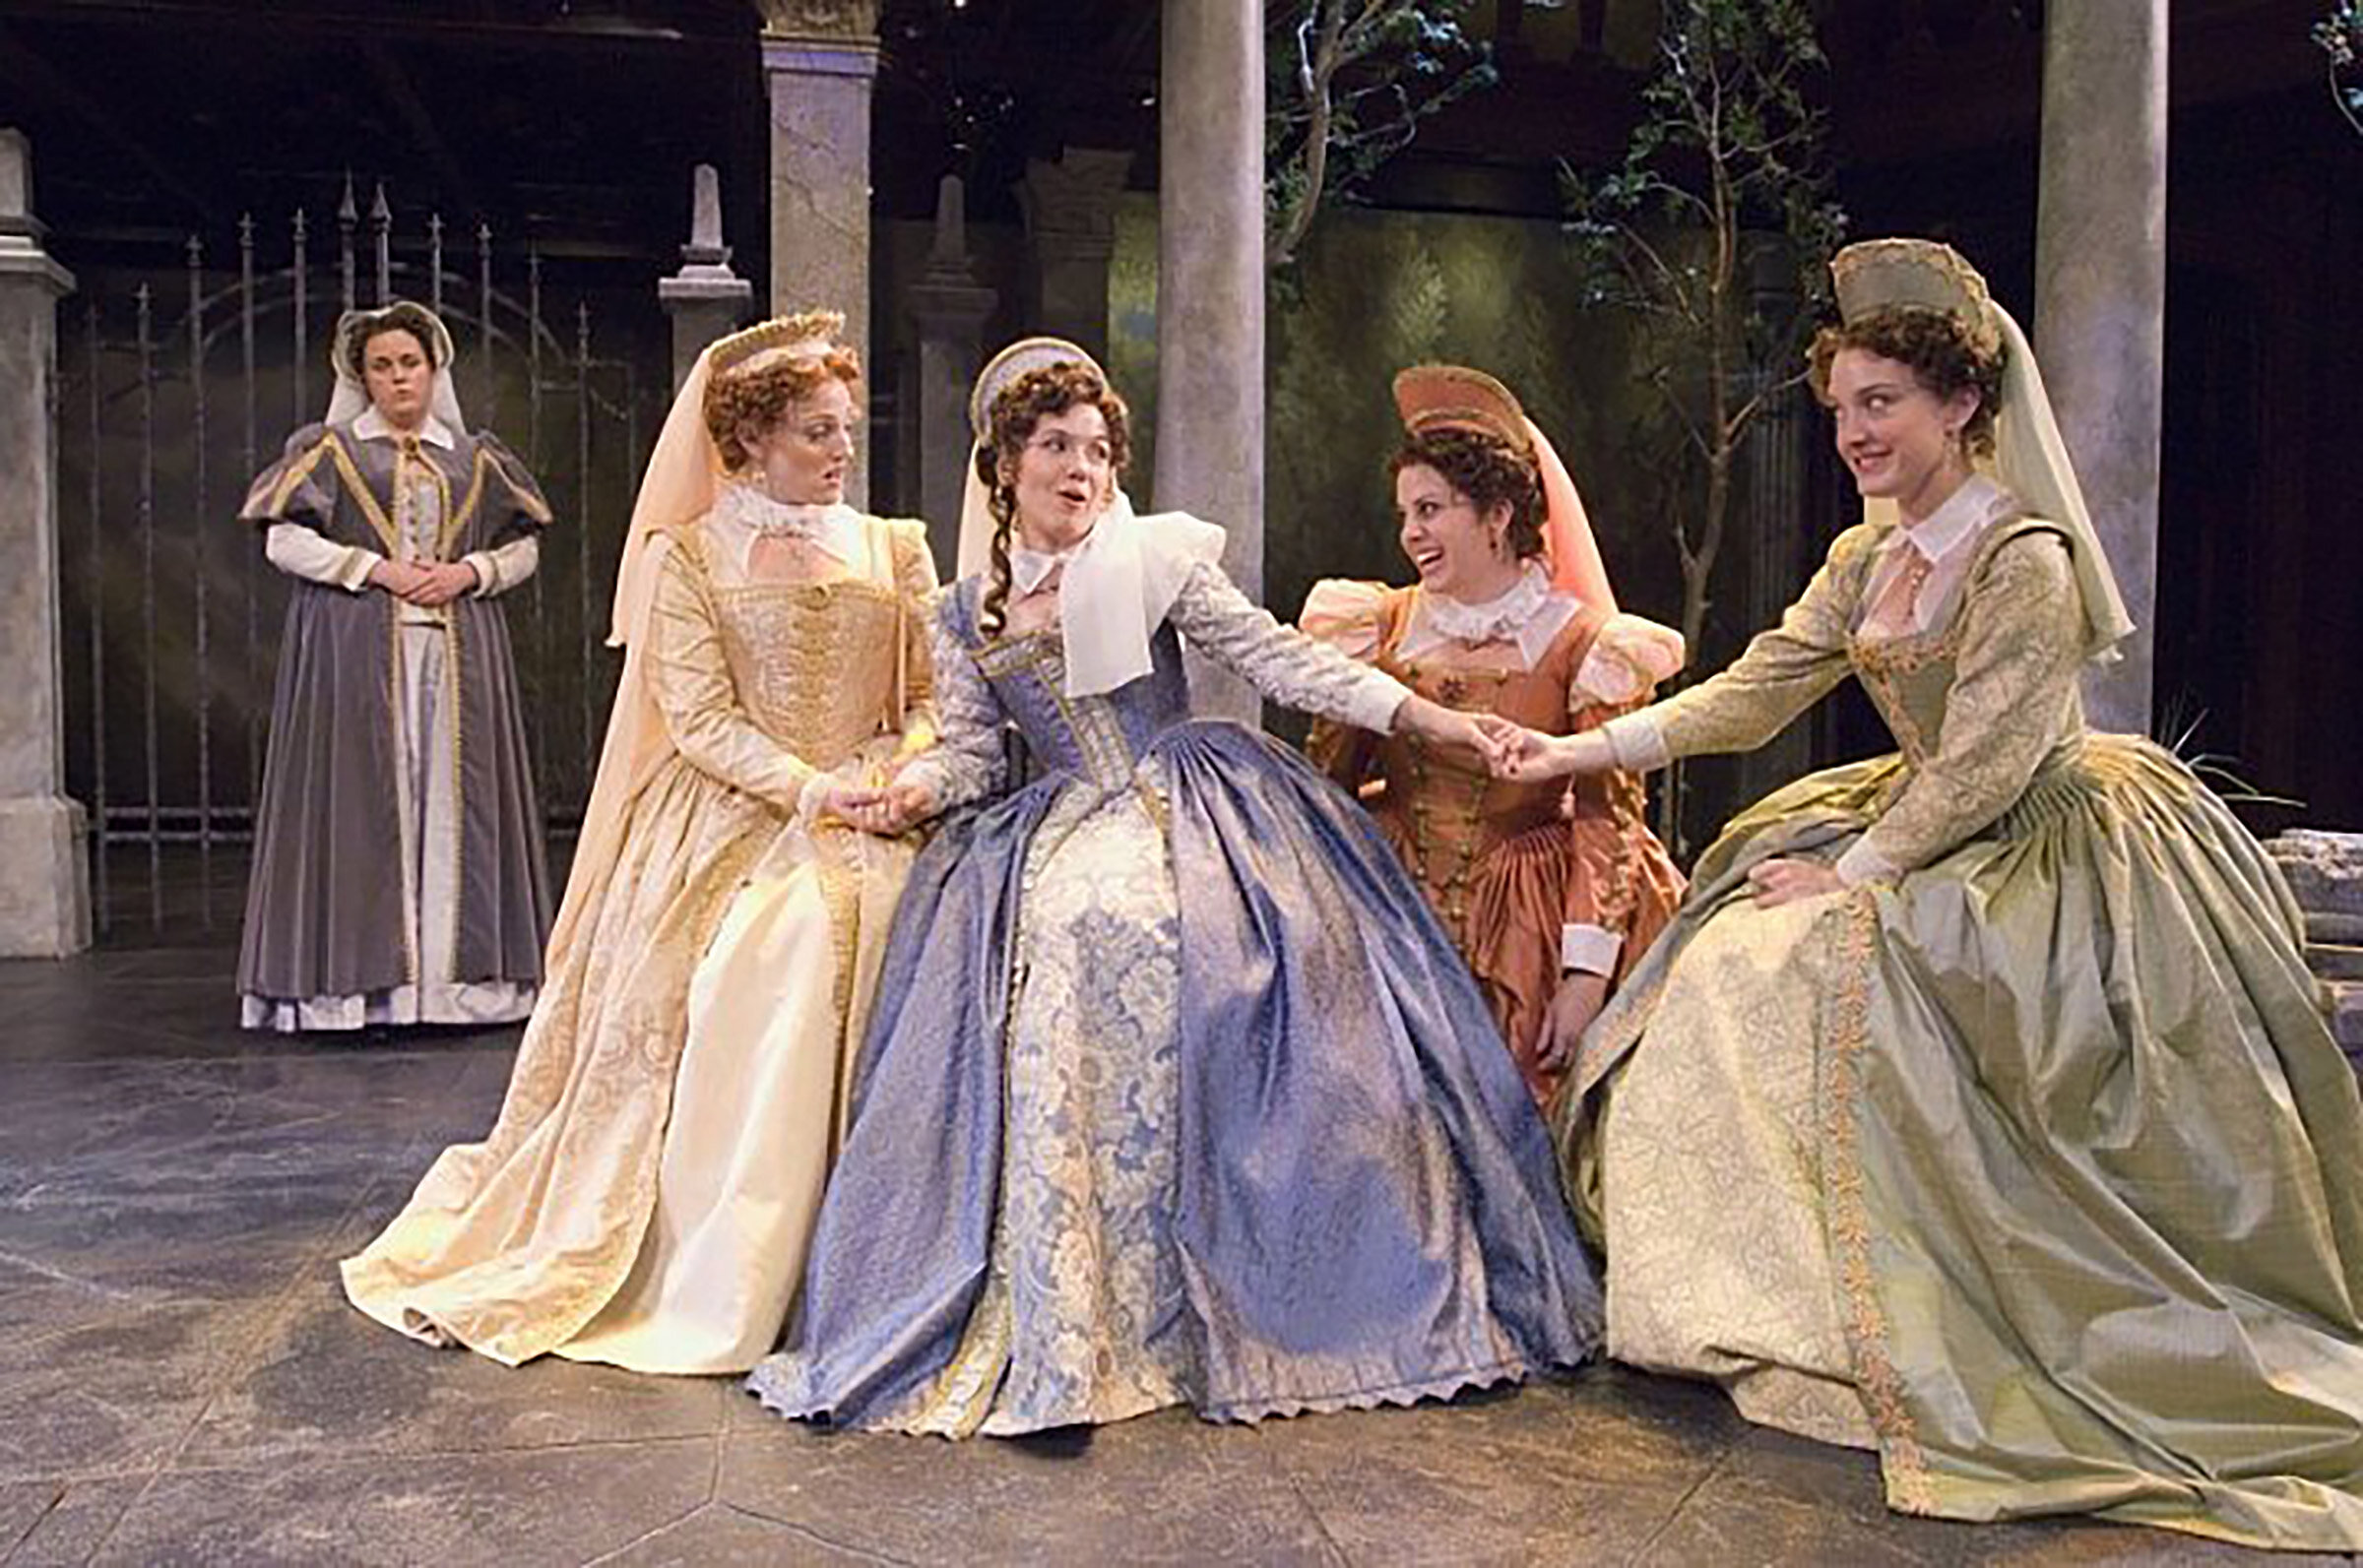  "[The ladies] are charming, and wonderfully ready to match the men ruse for ruse..." - Herald Journal 